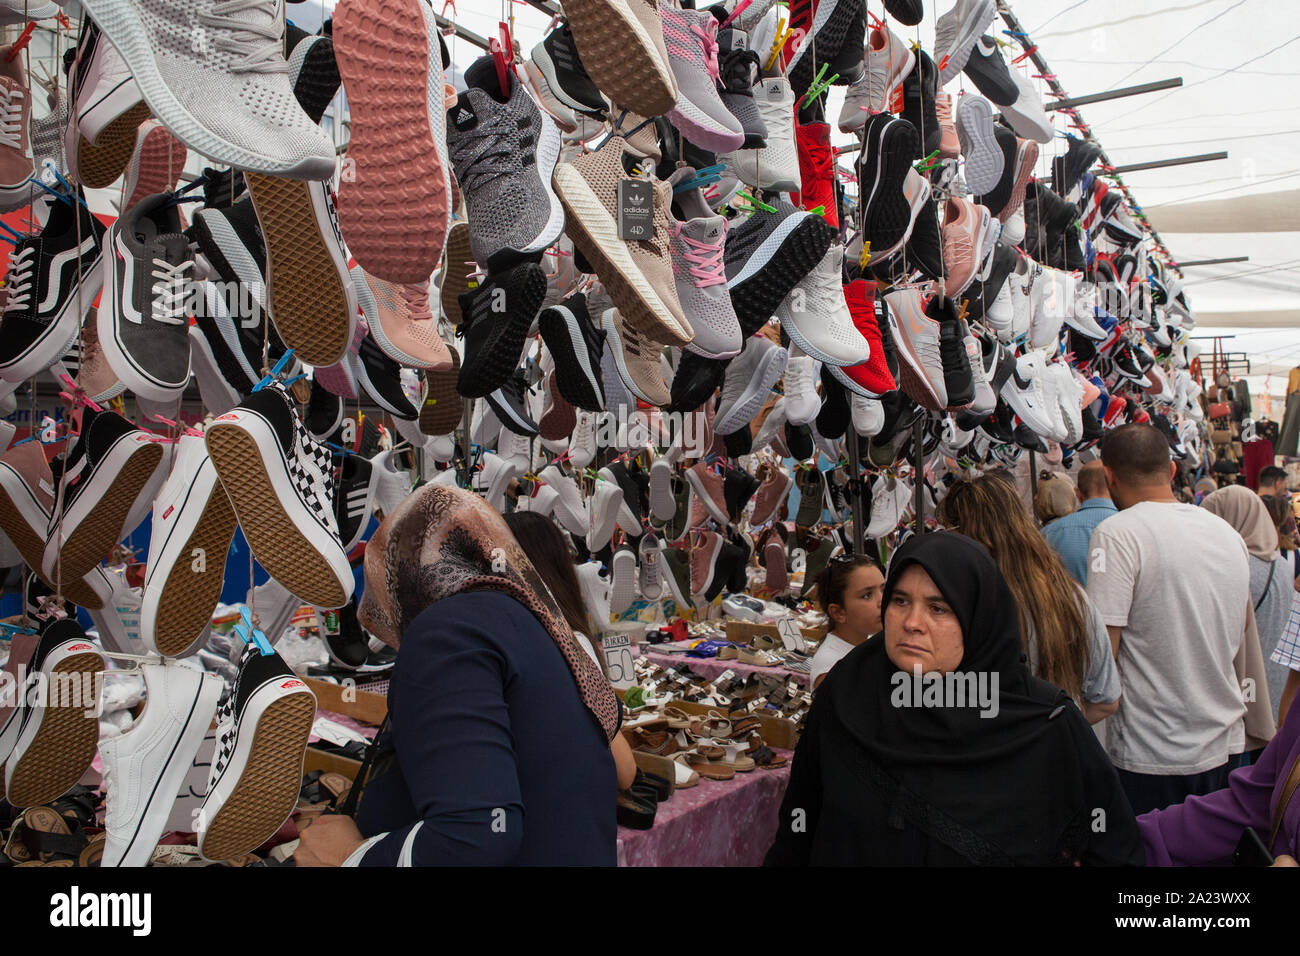 Display of footwear for sale at a street market in the Fatih district of Istanbul Stock Photo